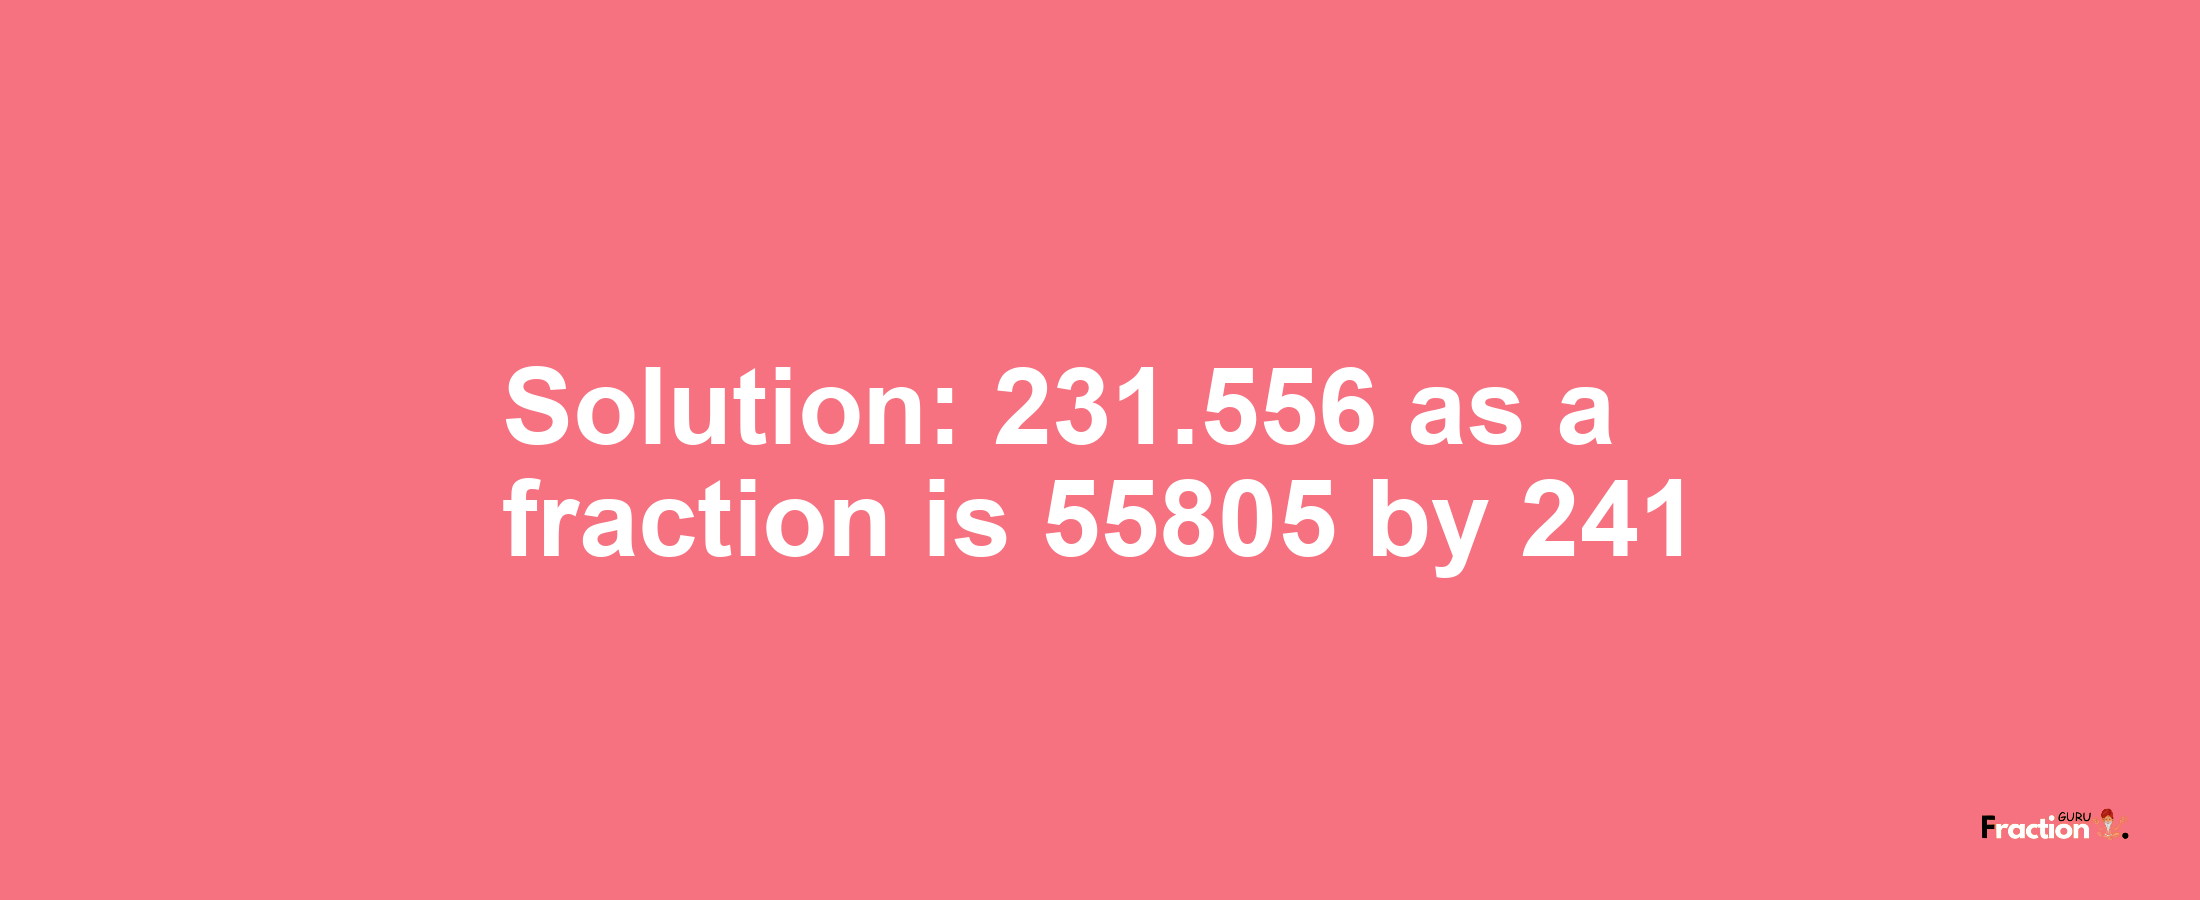 Solution:231.556 as a fraction is 55805/241